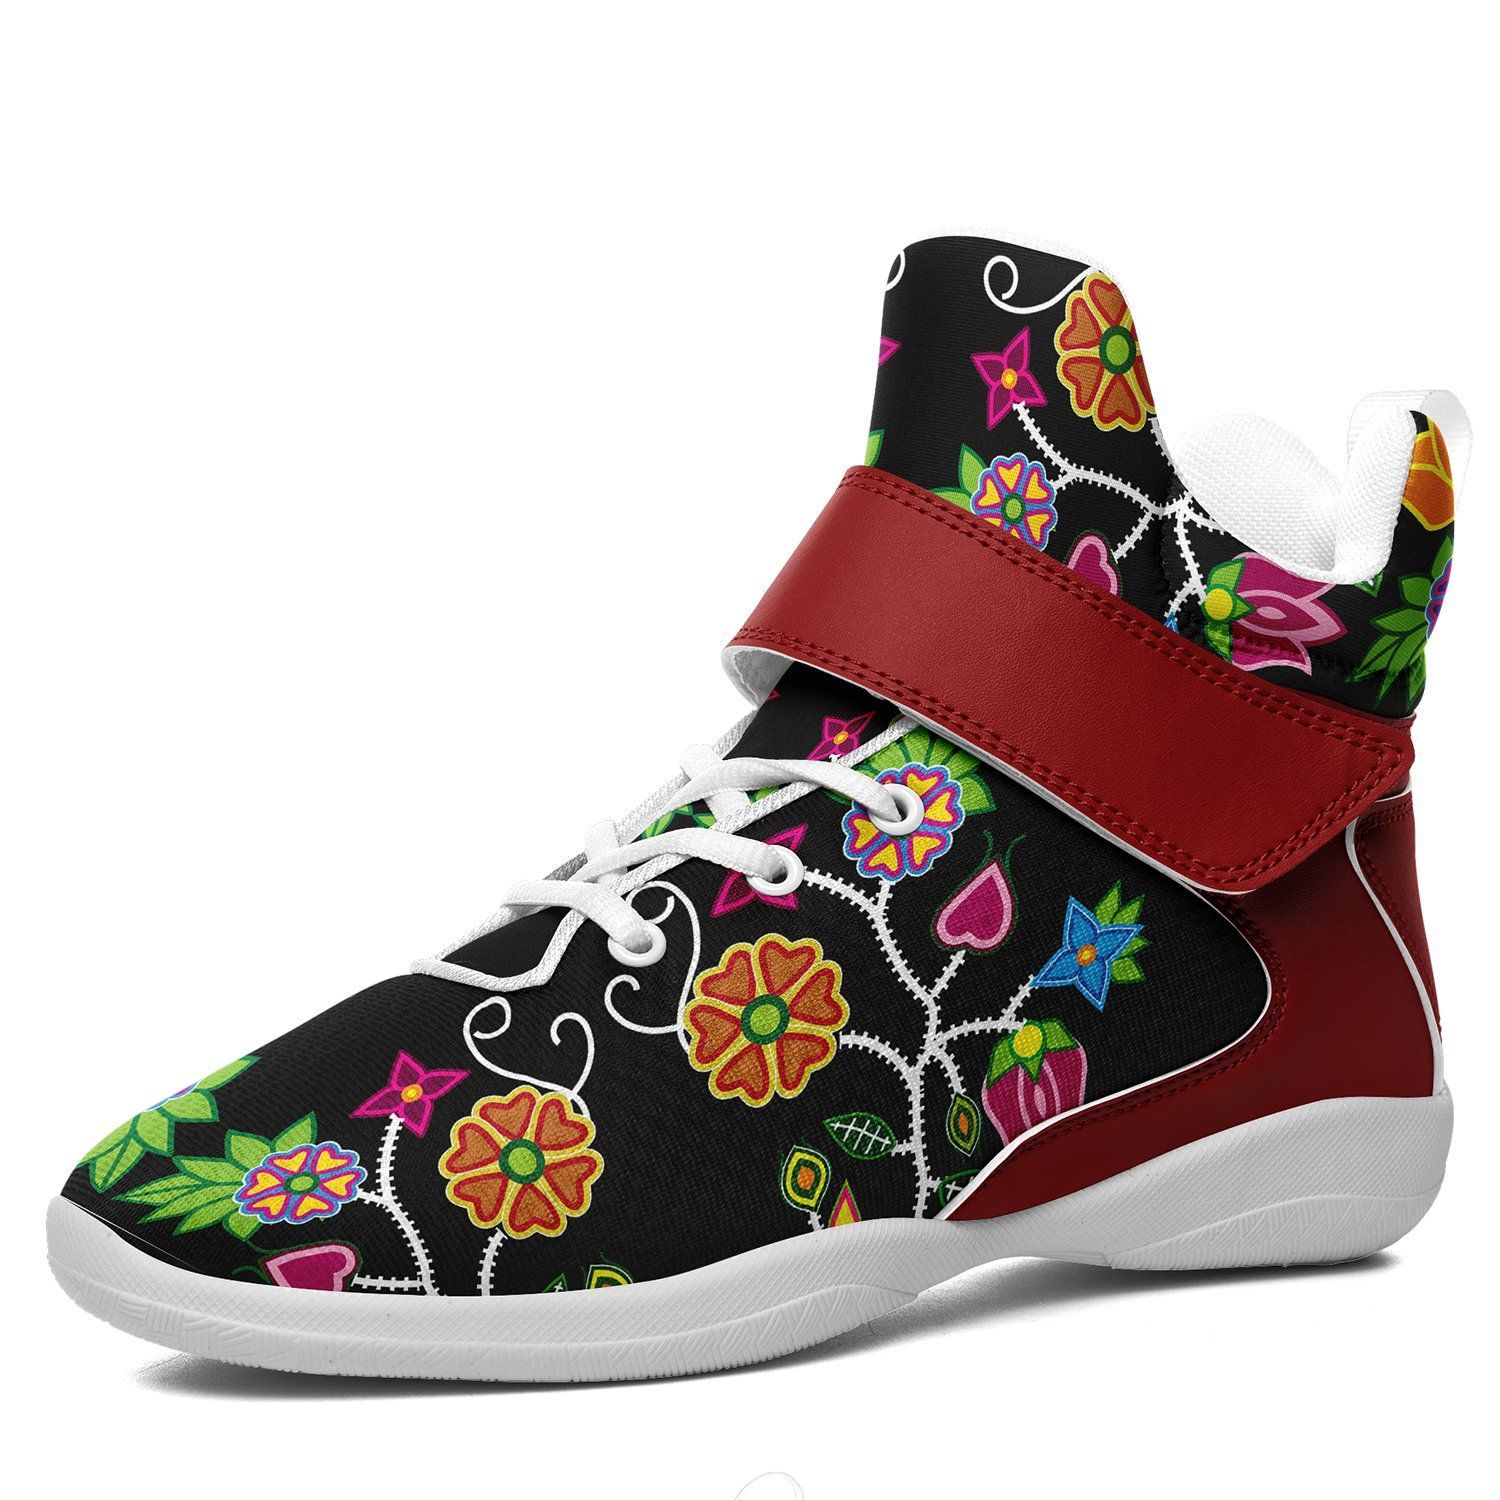 Floral Beadwork Kid's Ipottaa Basketball / Sport High Top Shoes 49 Dzine US Child 12.5 / EUR 30 White Sole with Dark Red Strap 